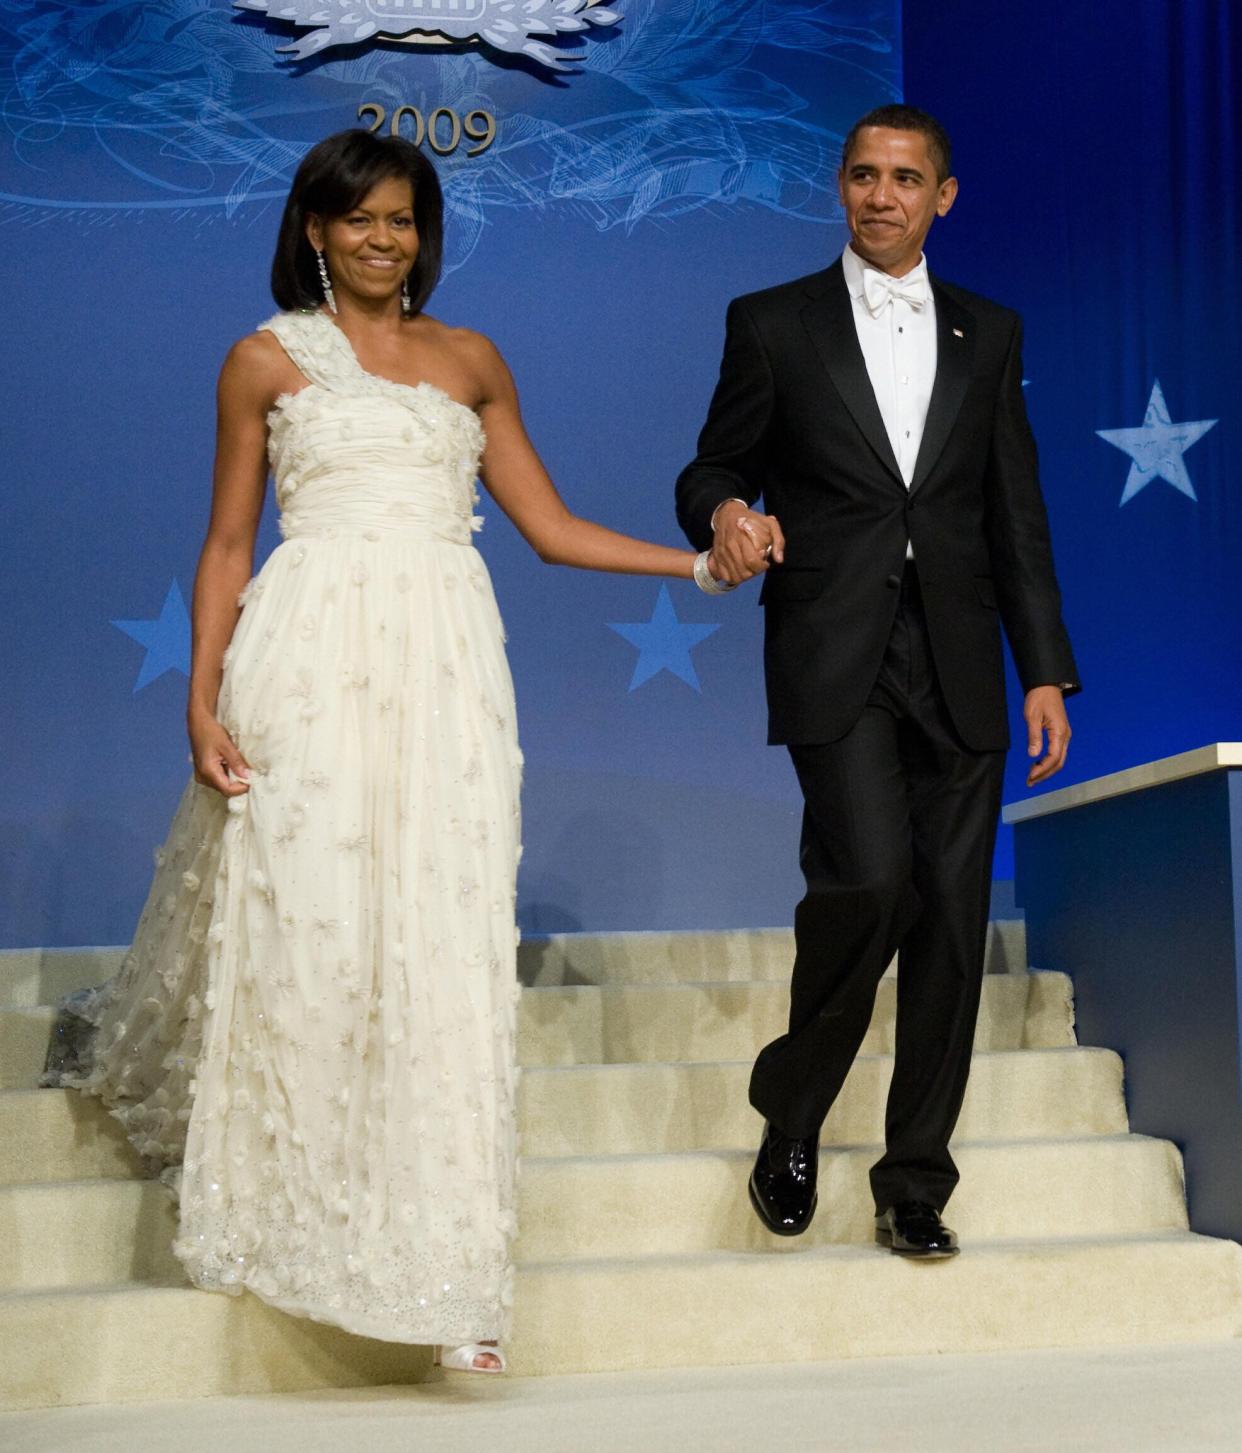 The couple arrives at one of the 2009 inaugural balls.